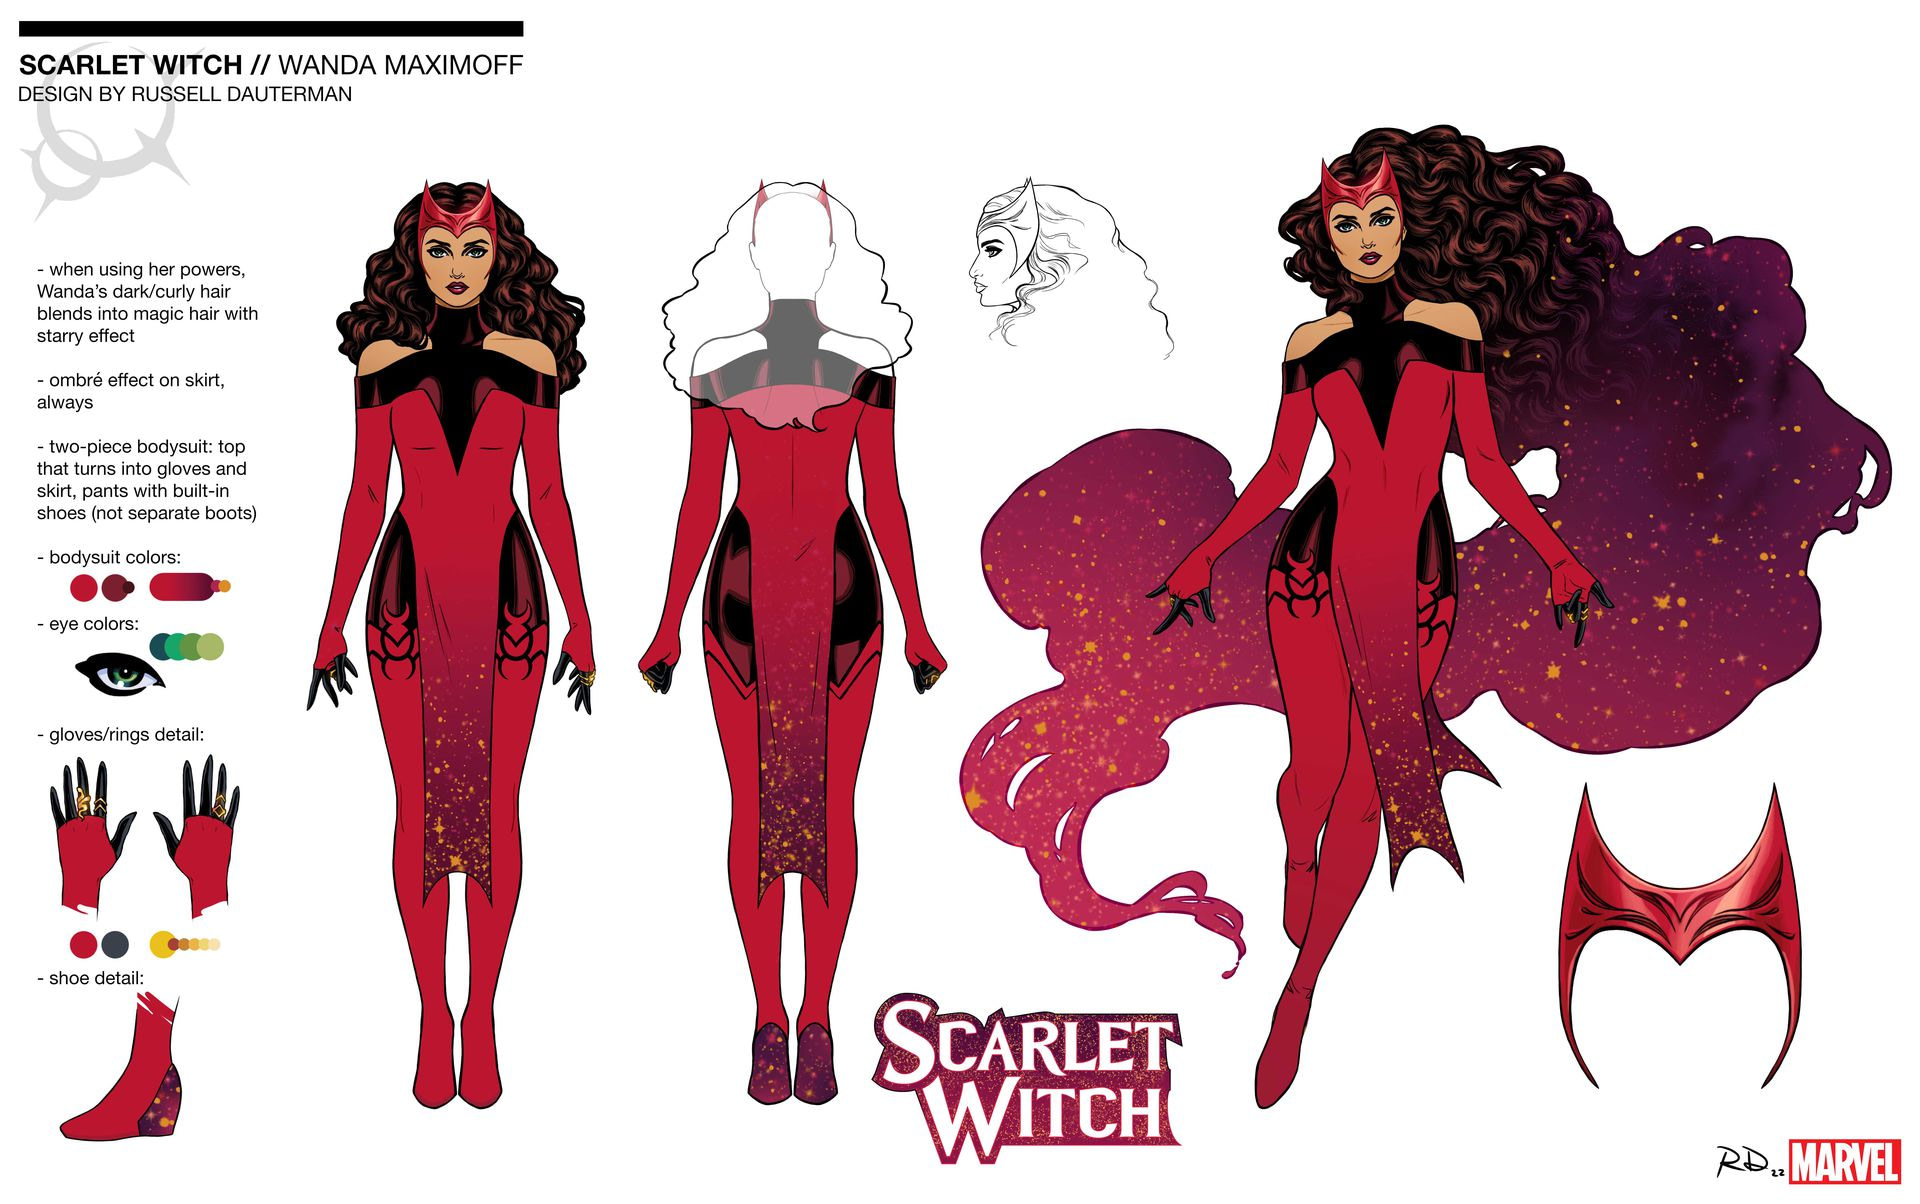 Preview: The Scarlet Witch returns with a new costume and an MCU favorite in their comics debut